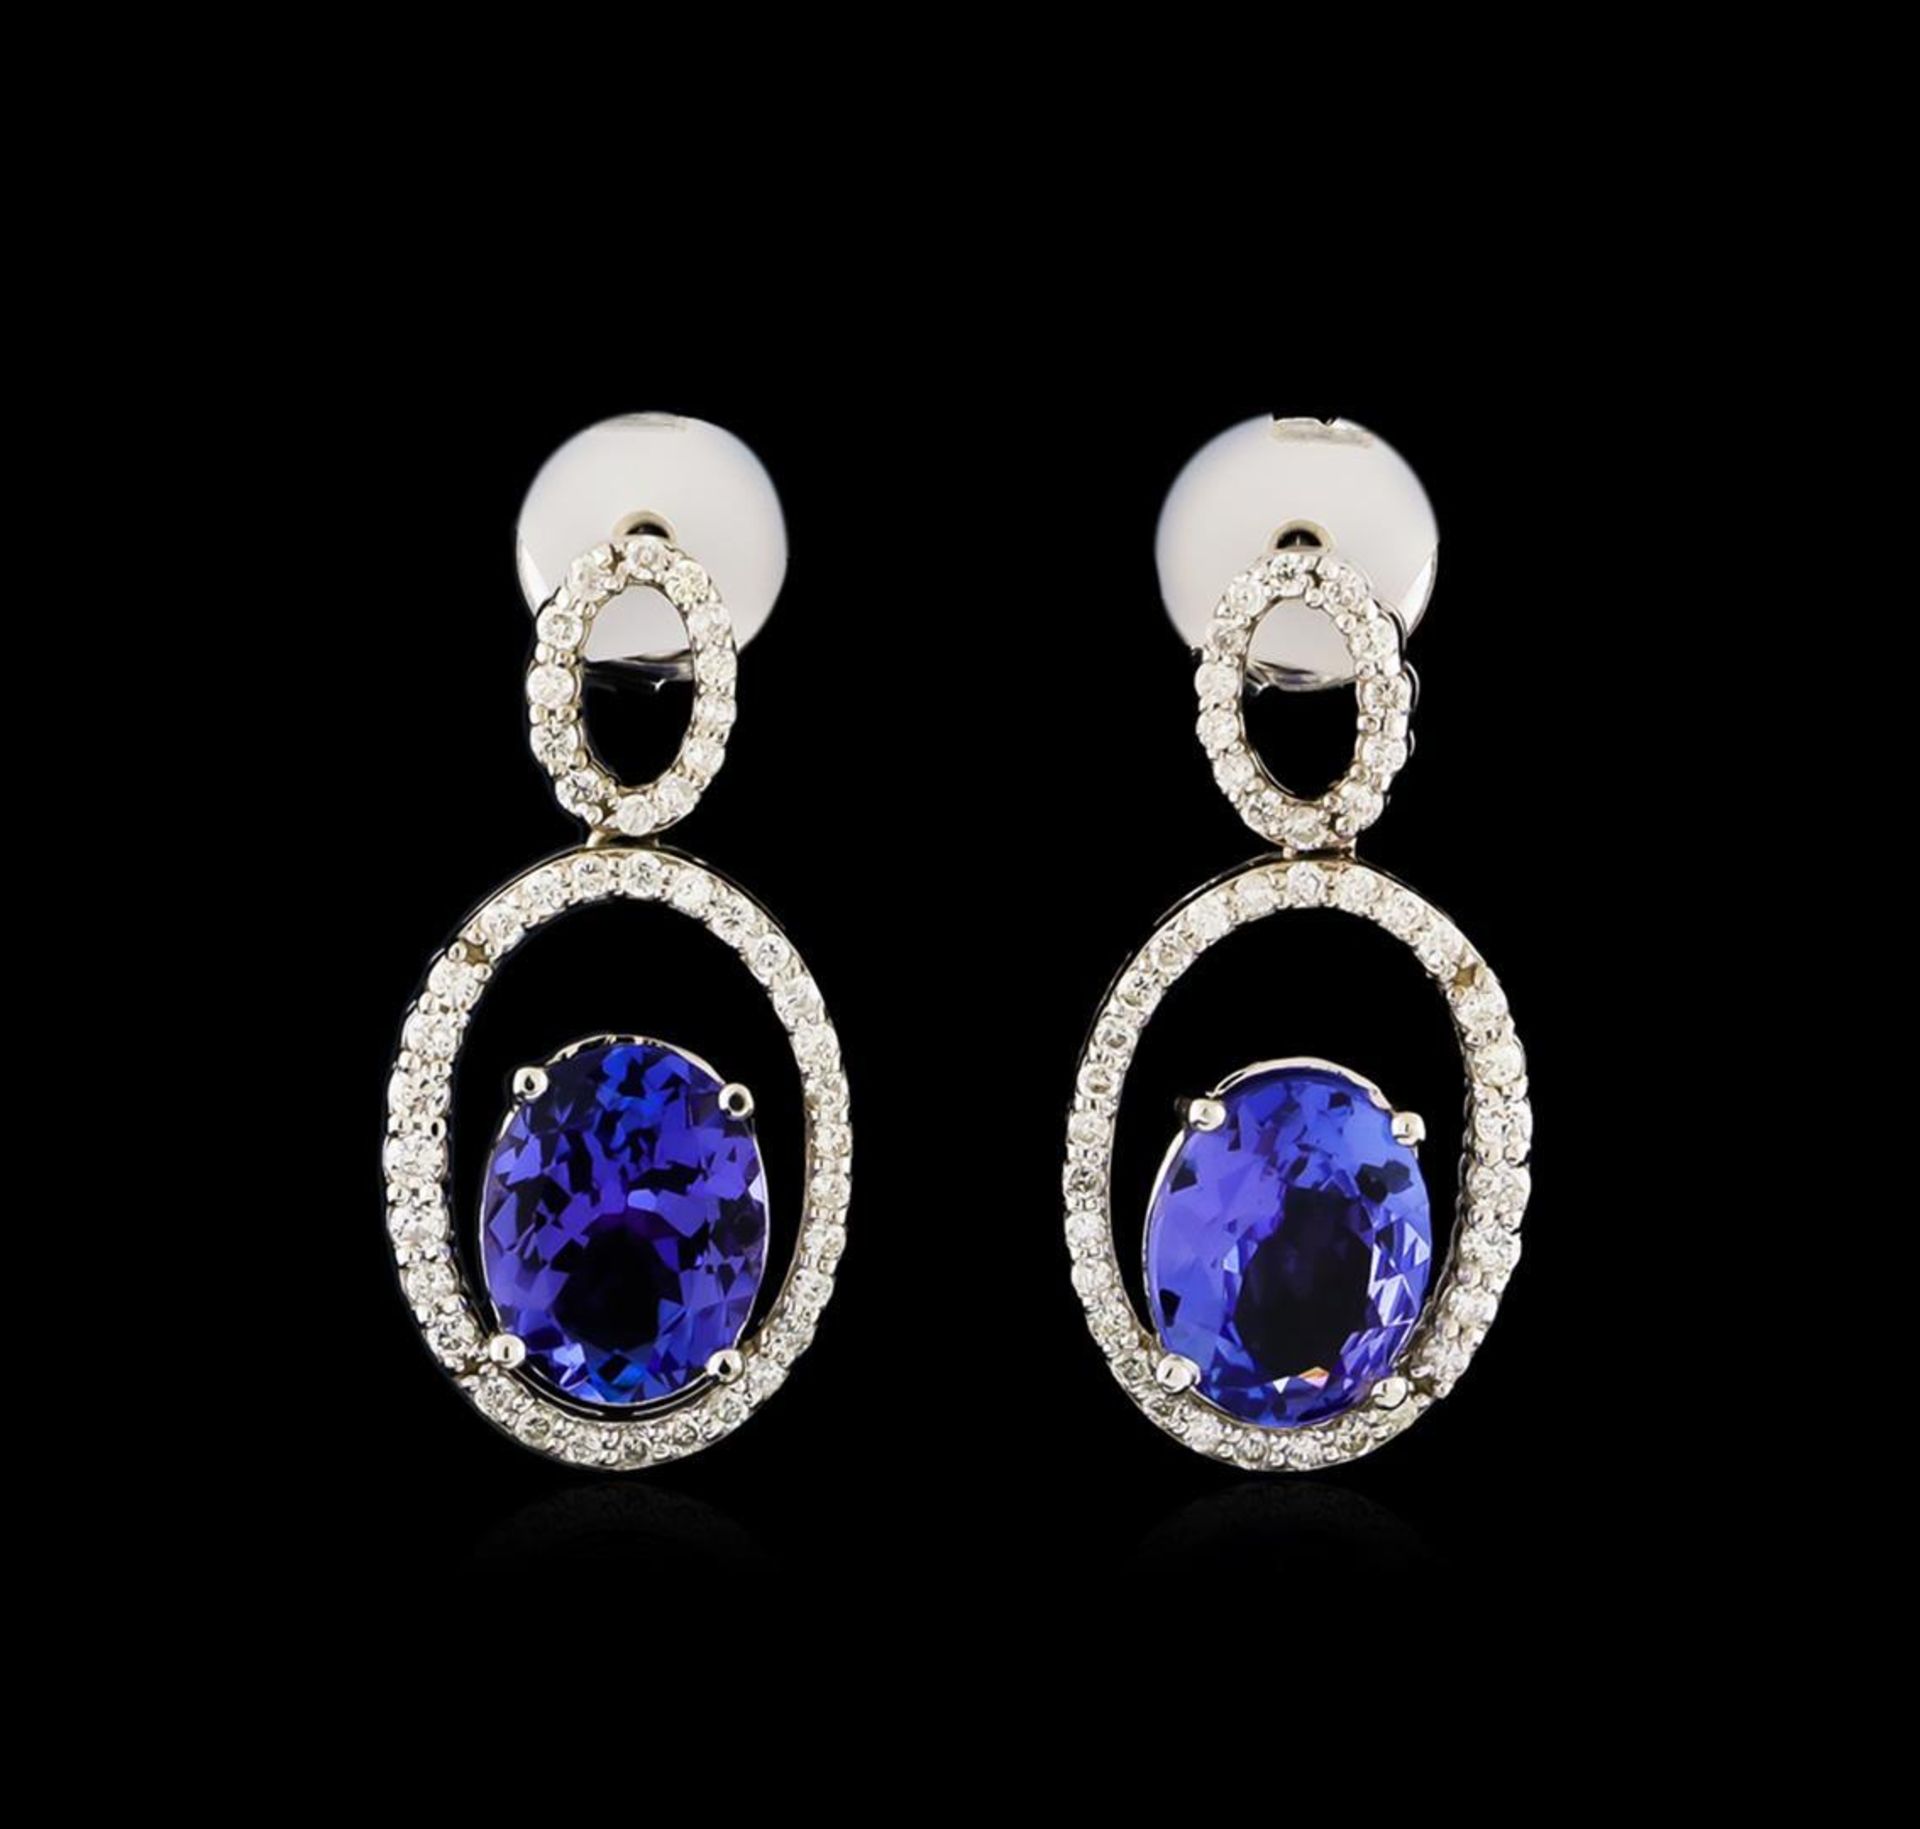 3.58ctw Tanzanite and Diamond Earrings - 14KT White Gold